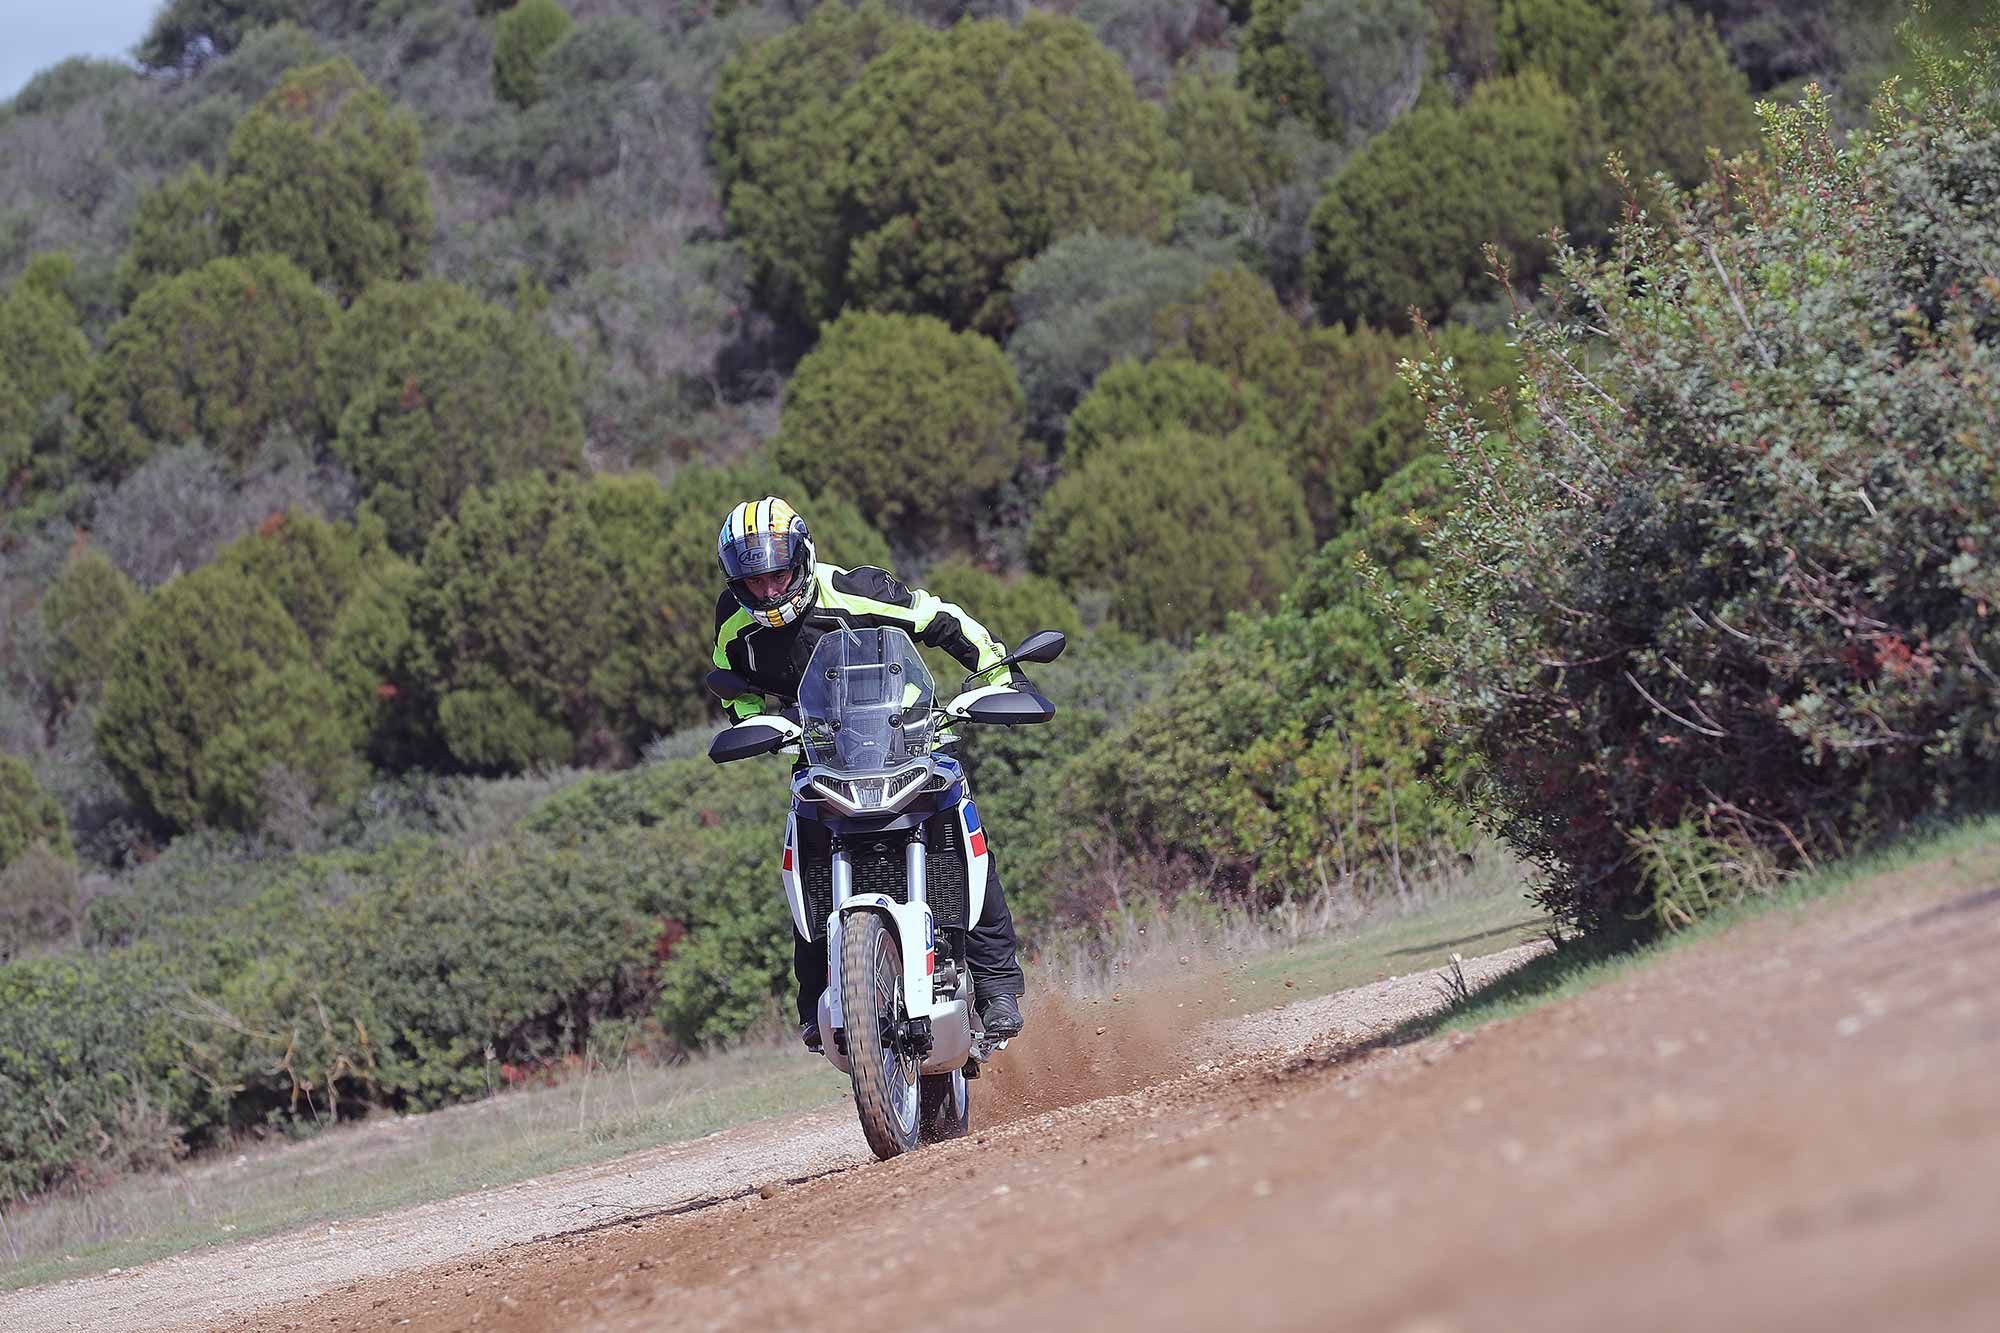 Make no mistake, the new Aprilia Tuareg isn’t just an off-road-looking bike, it is more than capable on dirt.